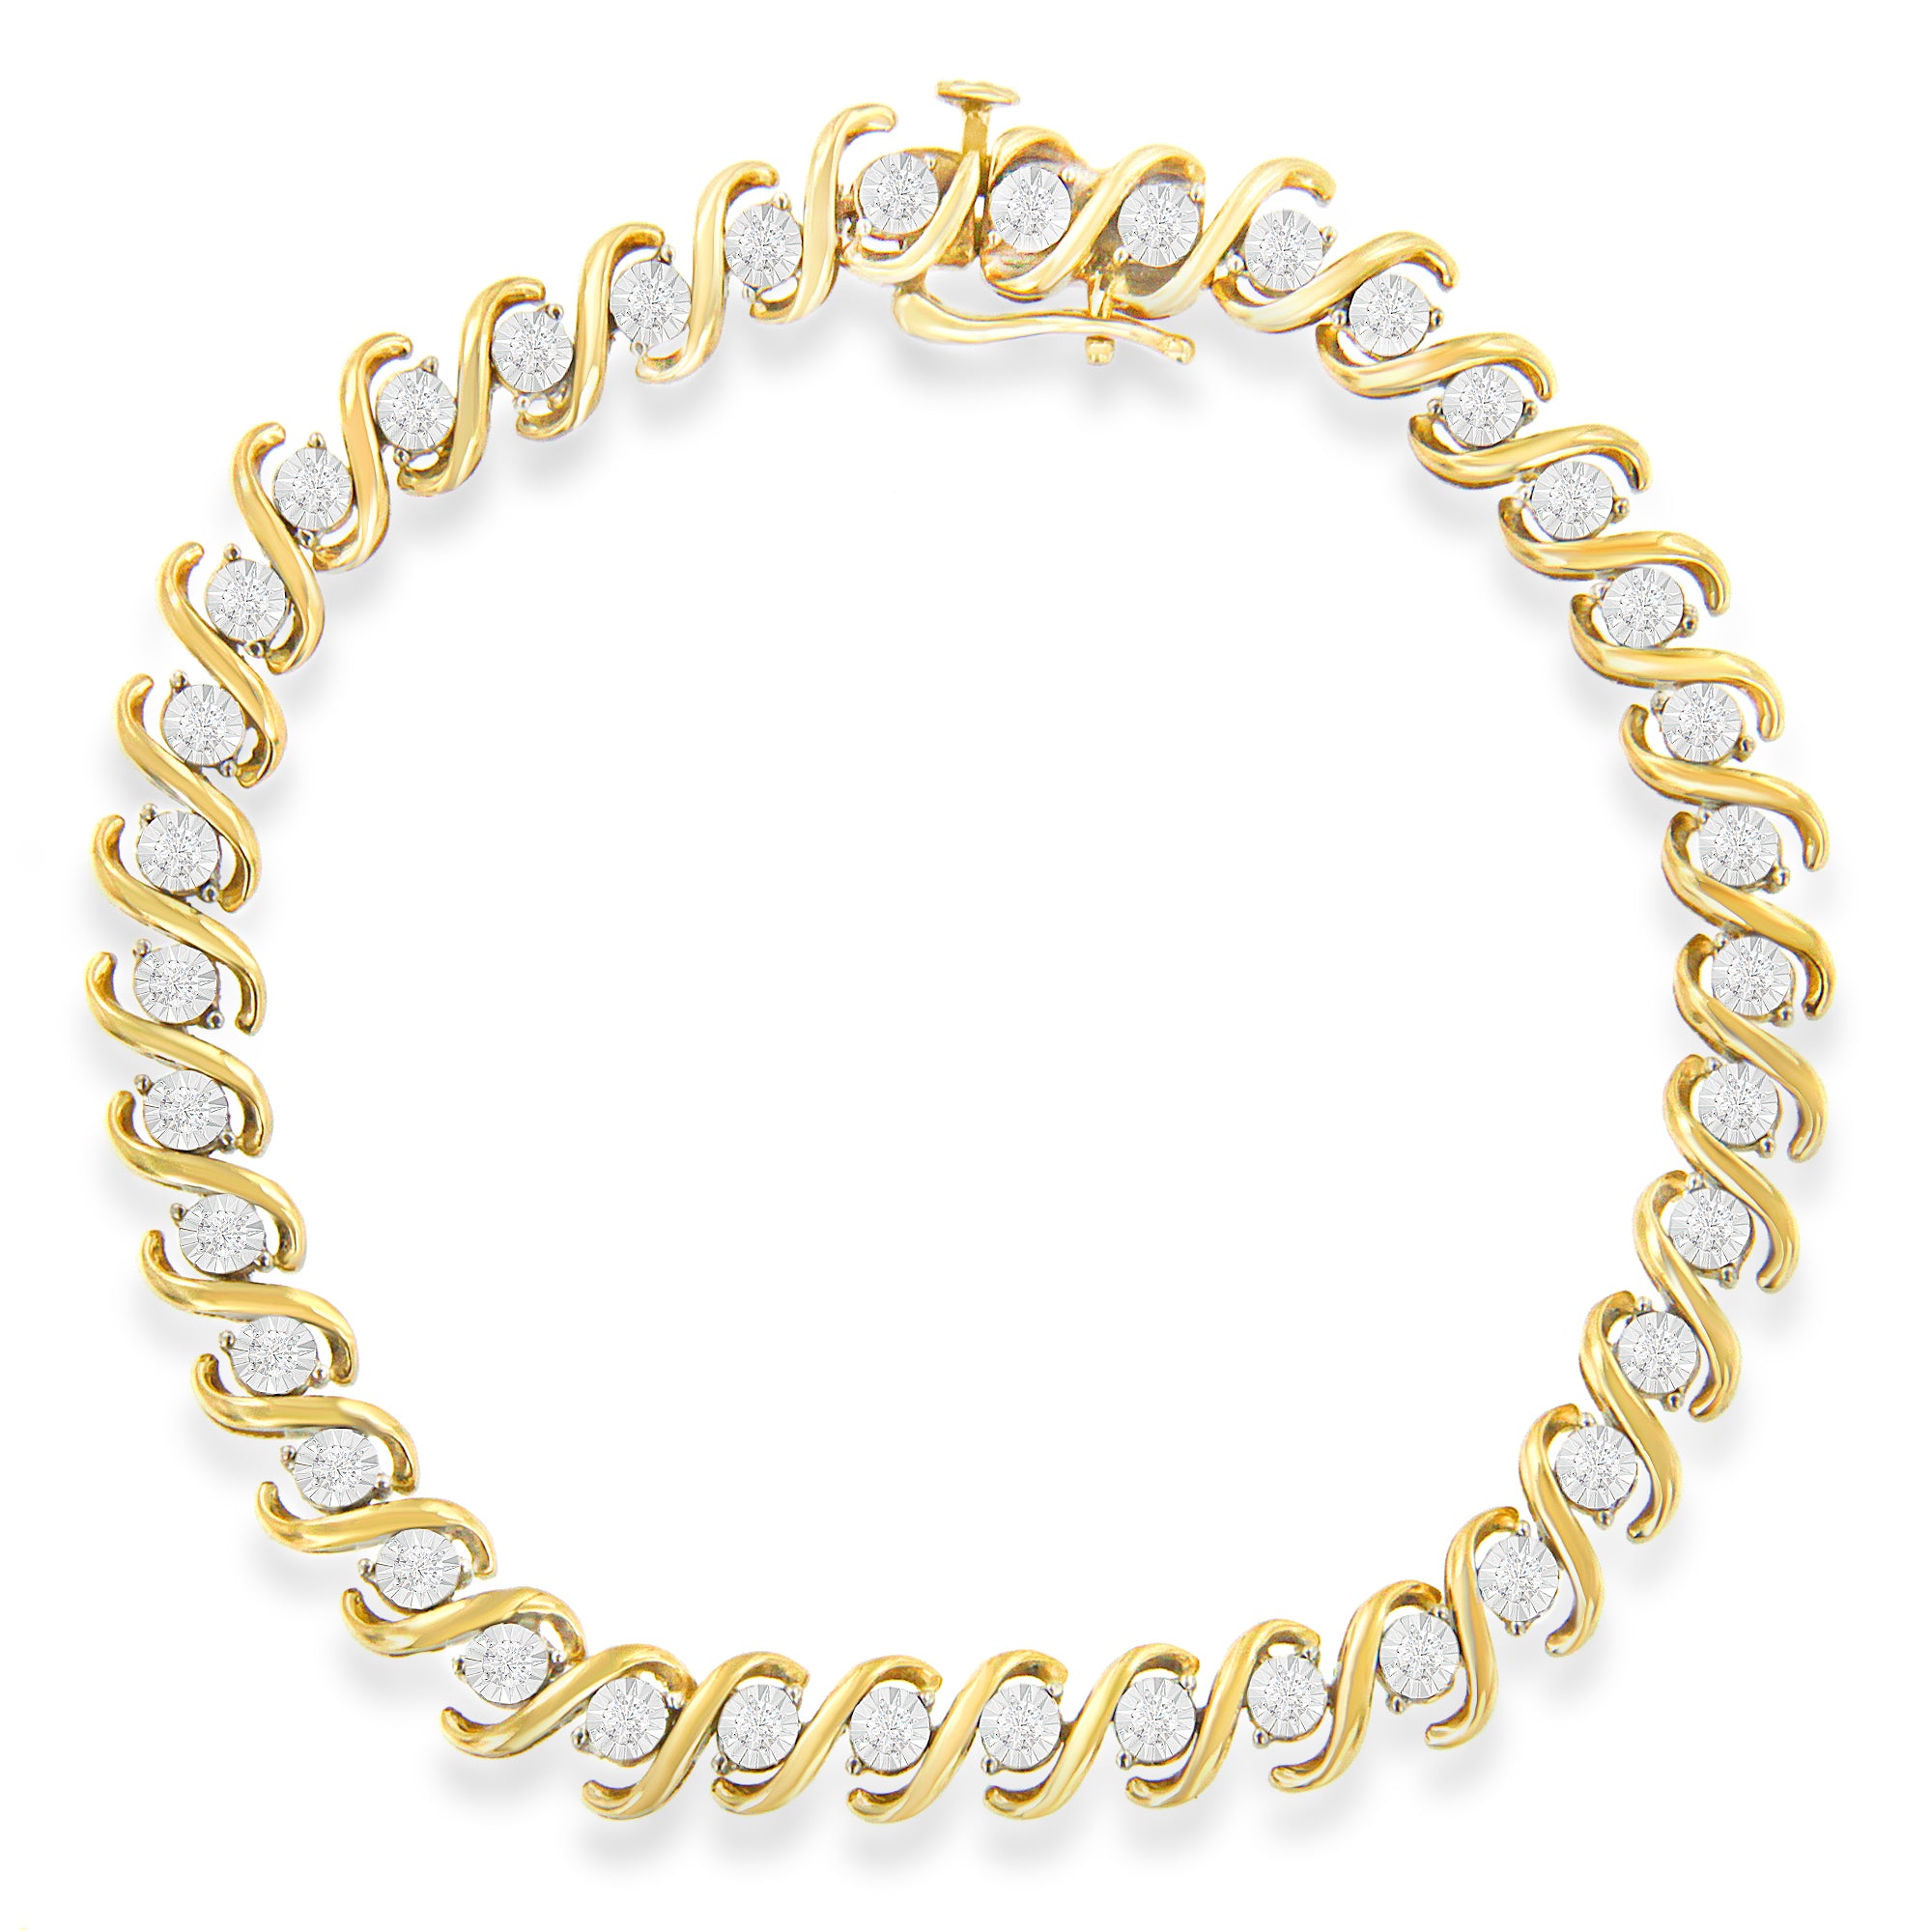 Yellow-Plated-Sterling-Silver-Round-Cut-Diamond-Bracelet-(0.5-Cttw,-H-I-Color,-I2-I3-Clarity)-Bracelets